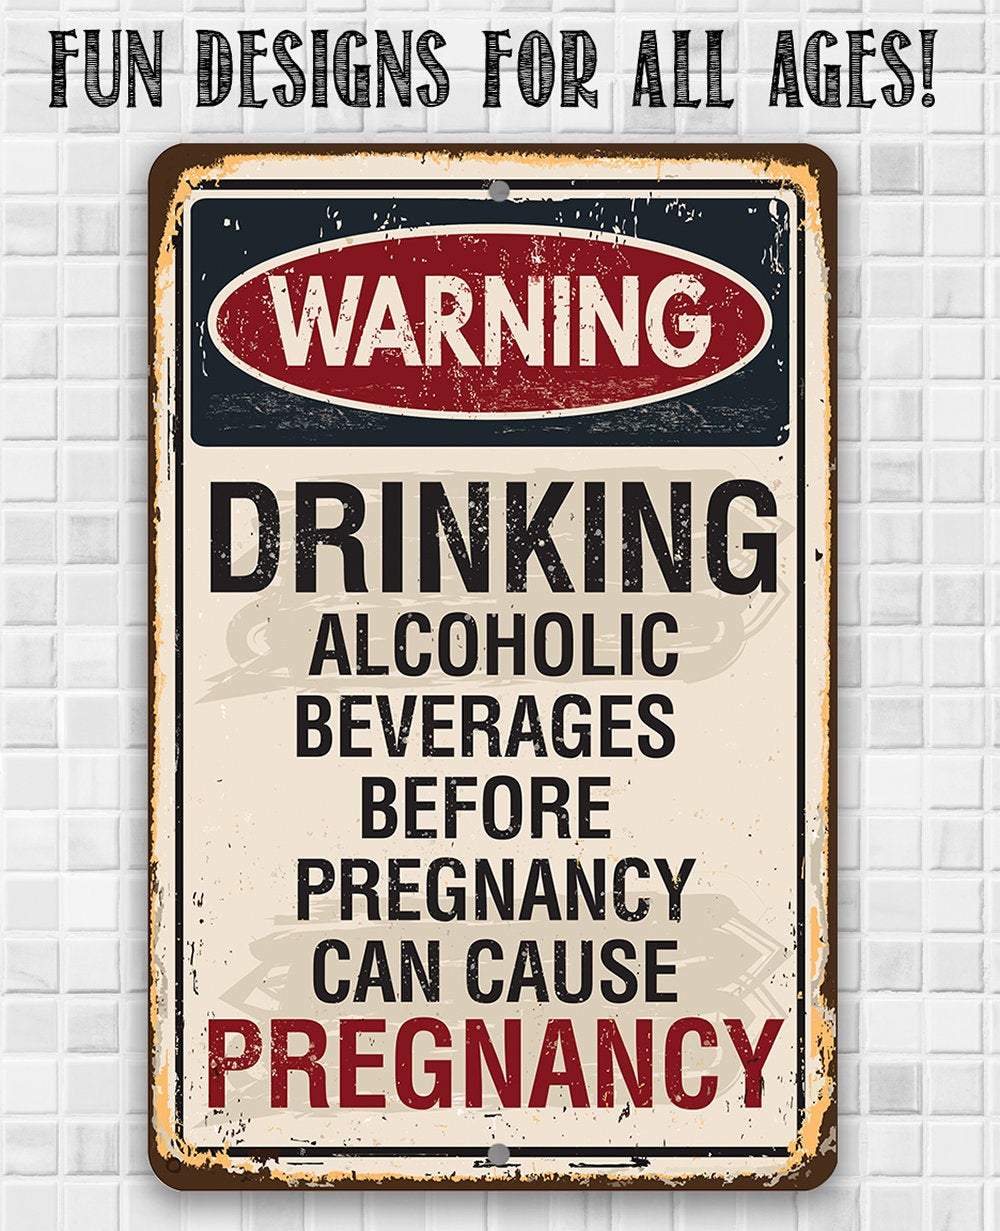 Alcoholic Beverages Can Cause Pregnancy - Metal Sign | Lone Star Art.